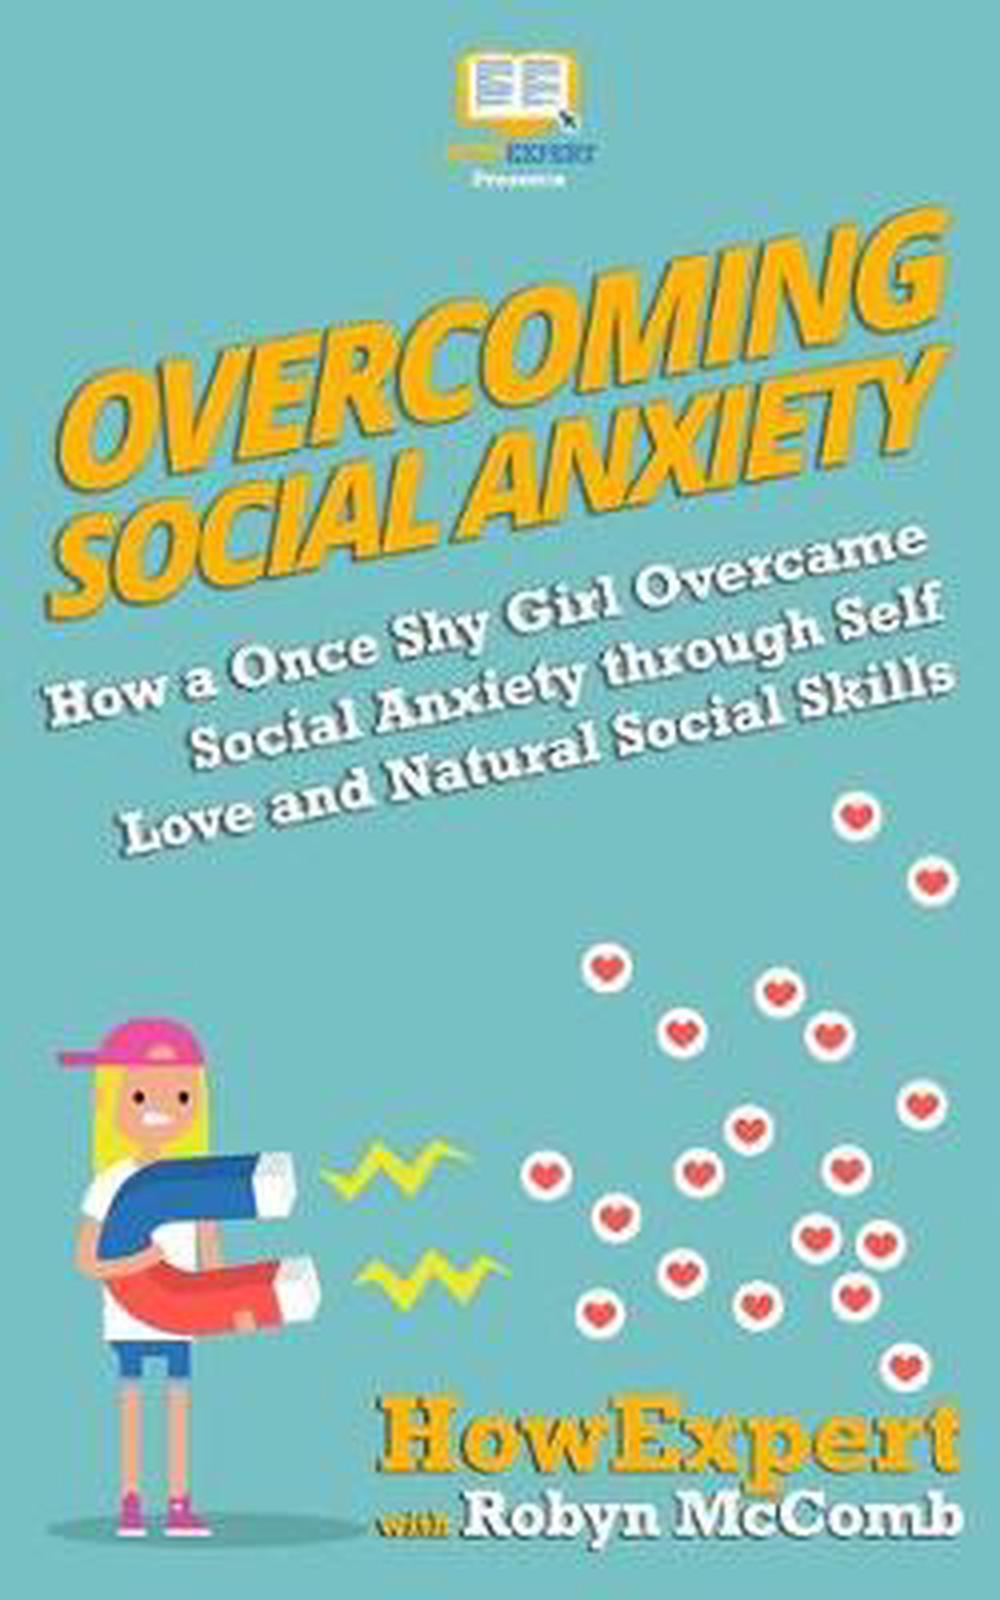 Overcoming Social Anxiety by HowExpert (English) Paperback ...